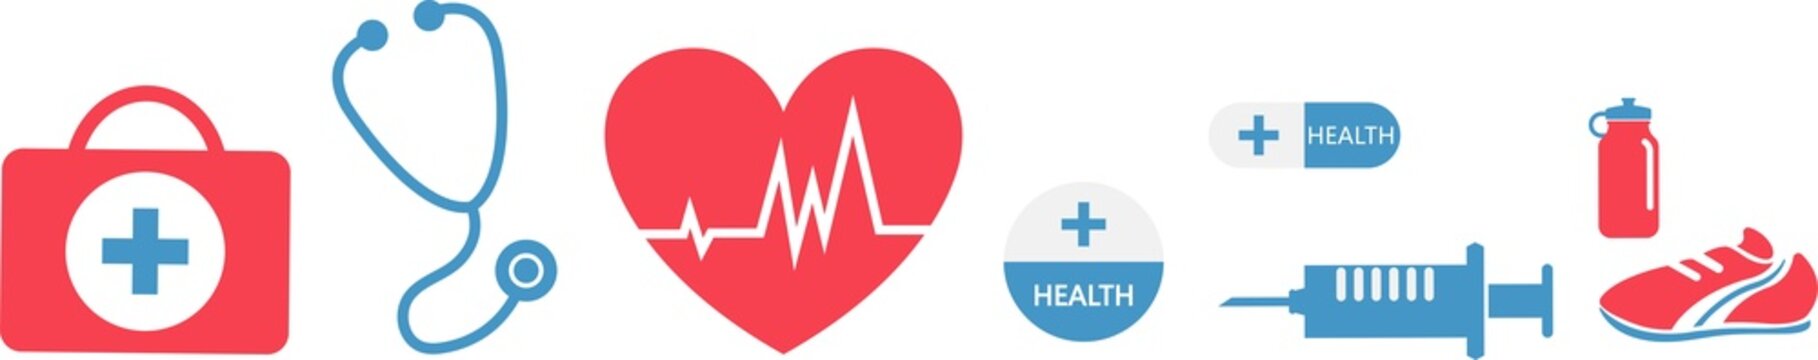 health care design png